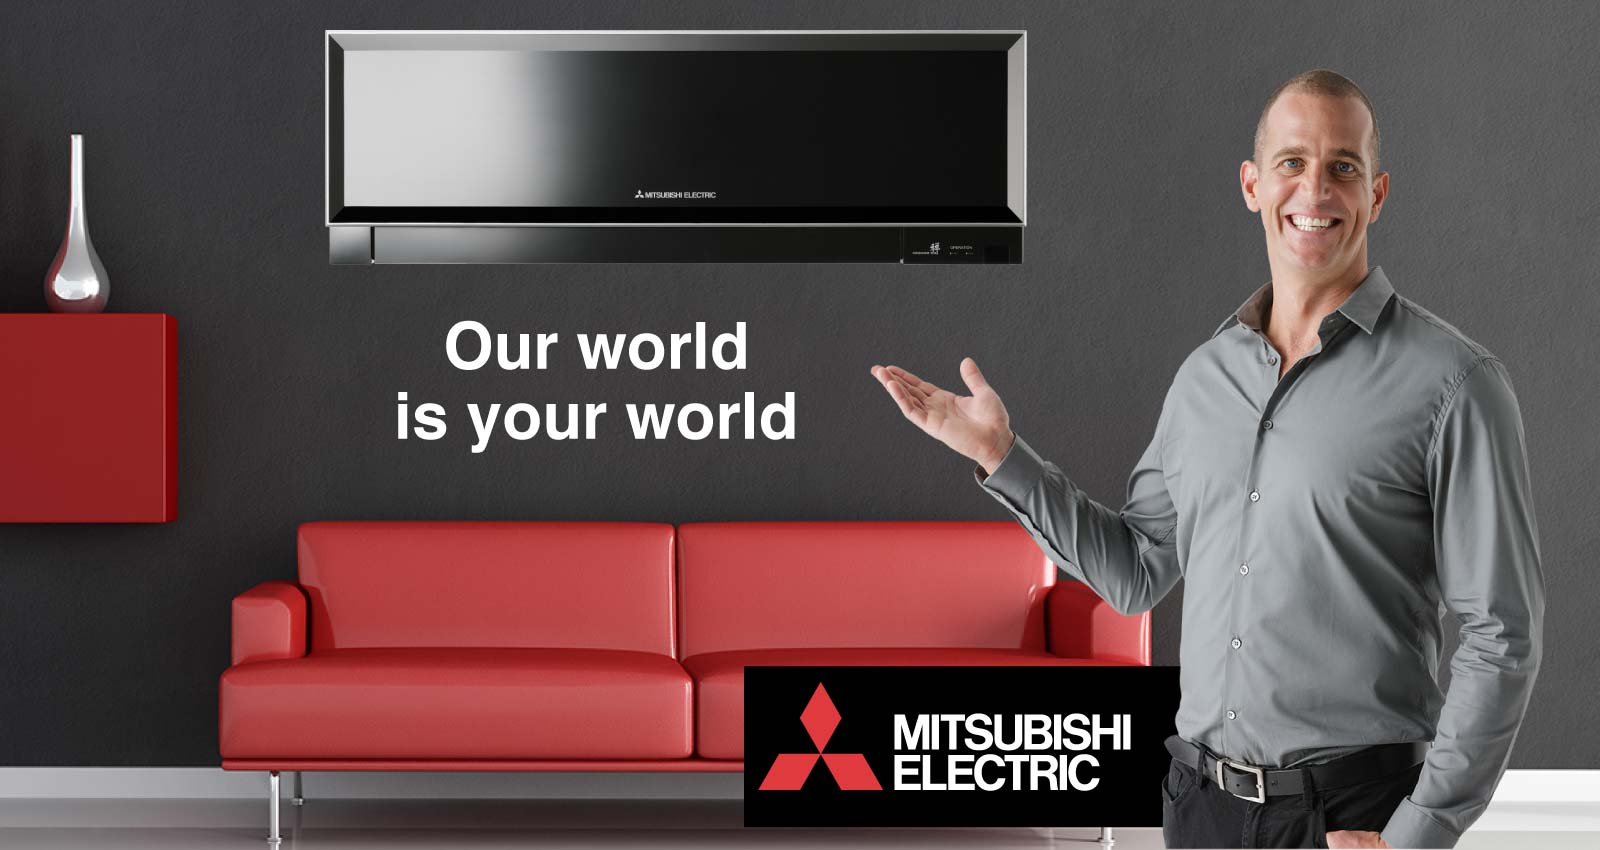 mitsubishi_electric_air-conditioning-banner-ad.jpg